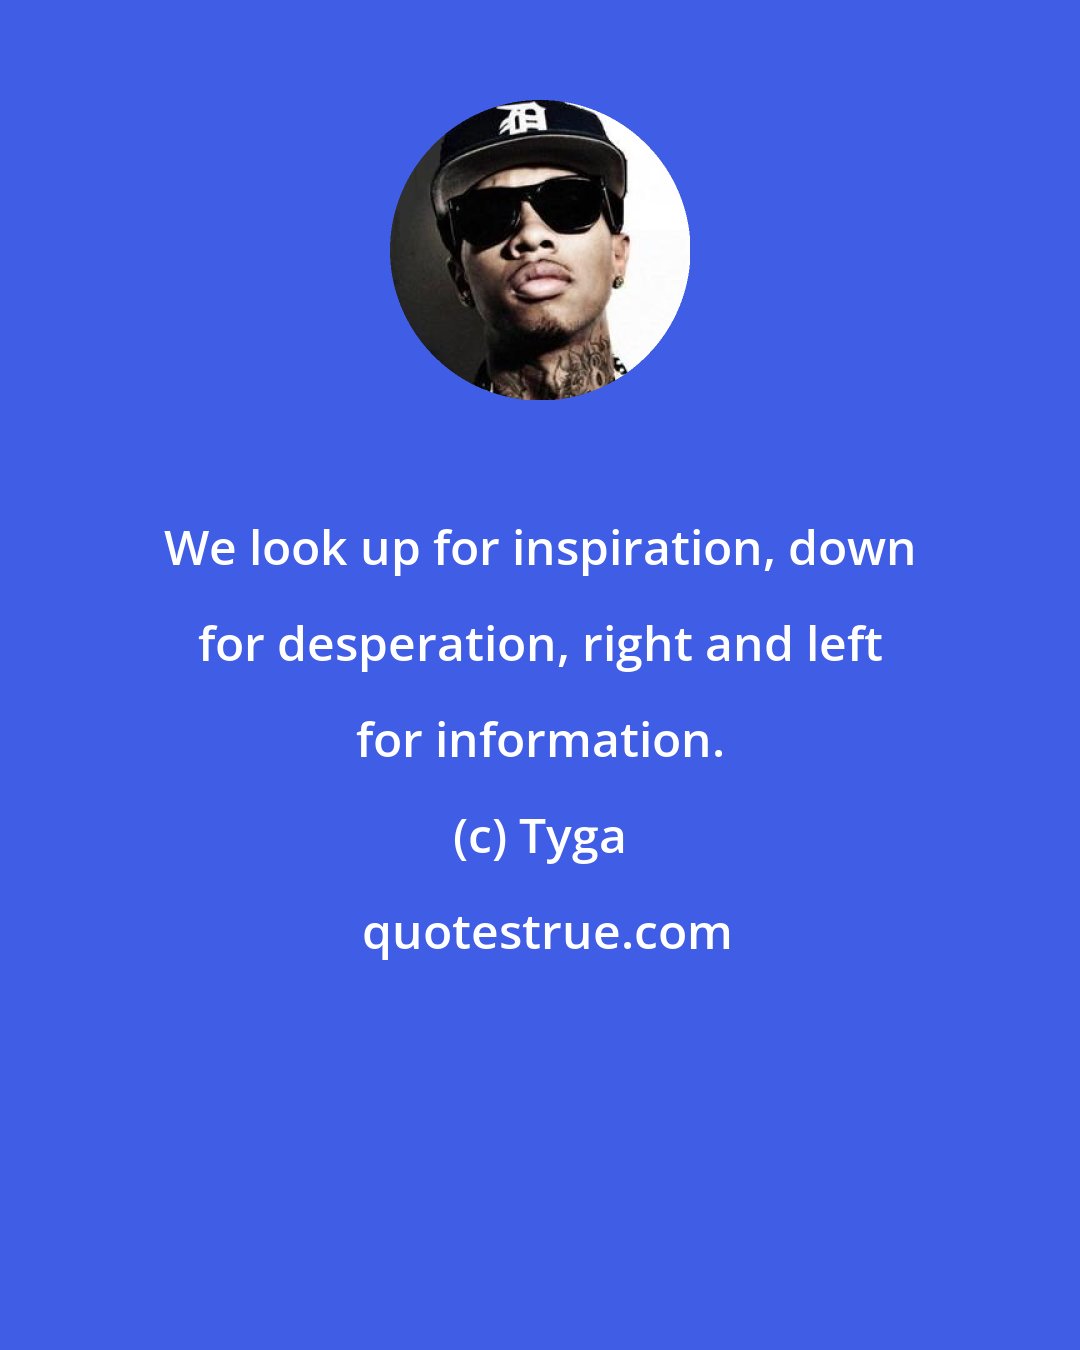 Tyga: We look up for inspiration, down for desperation, right and left for information.